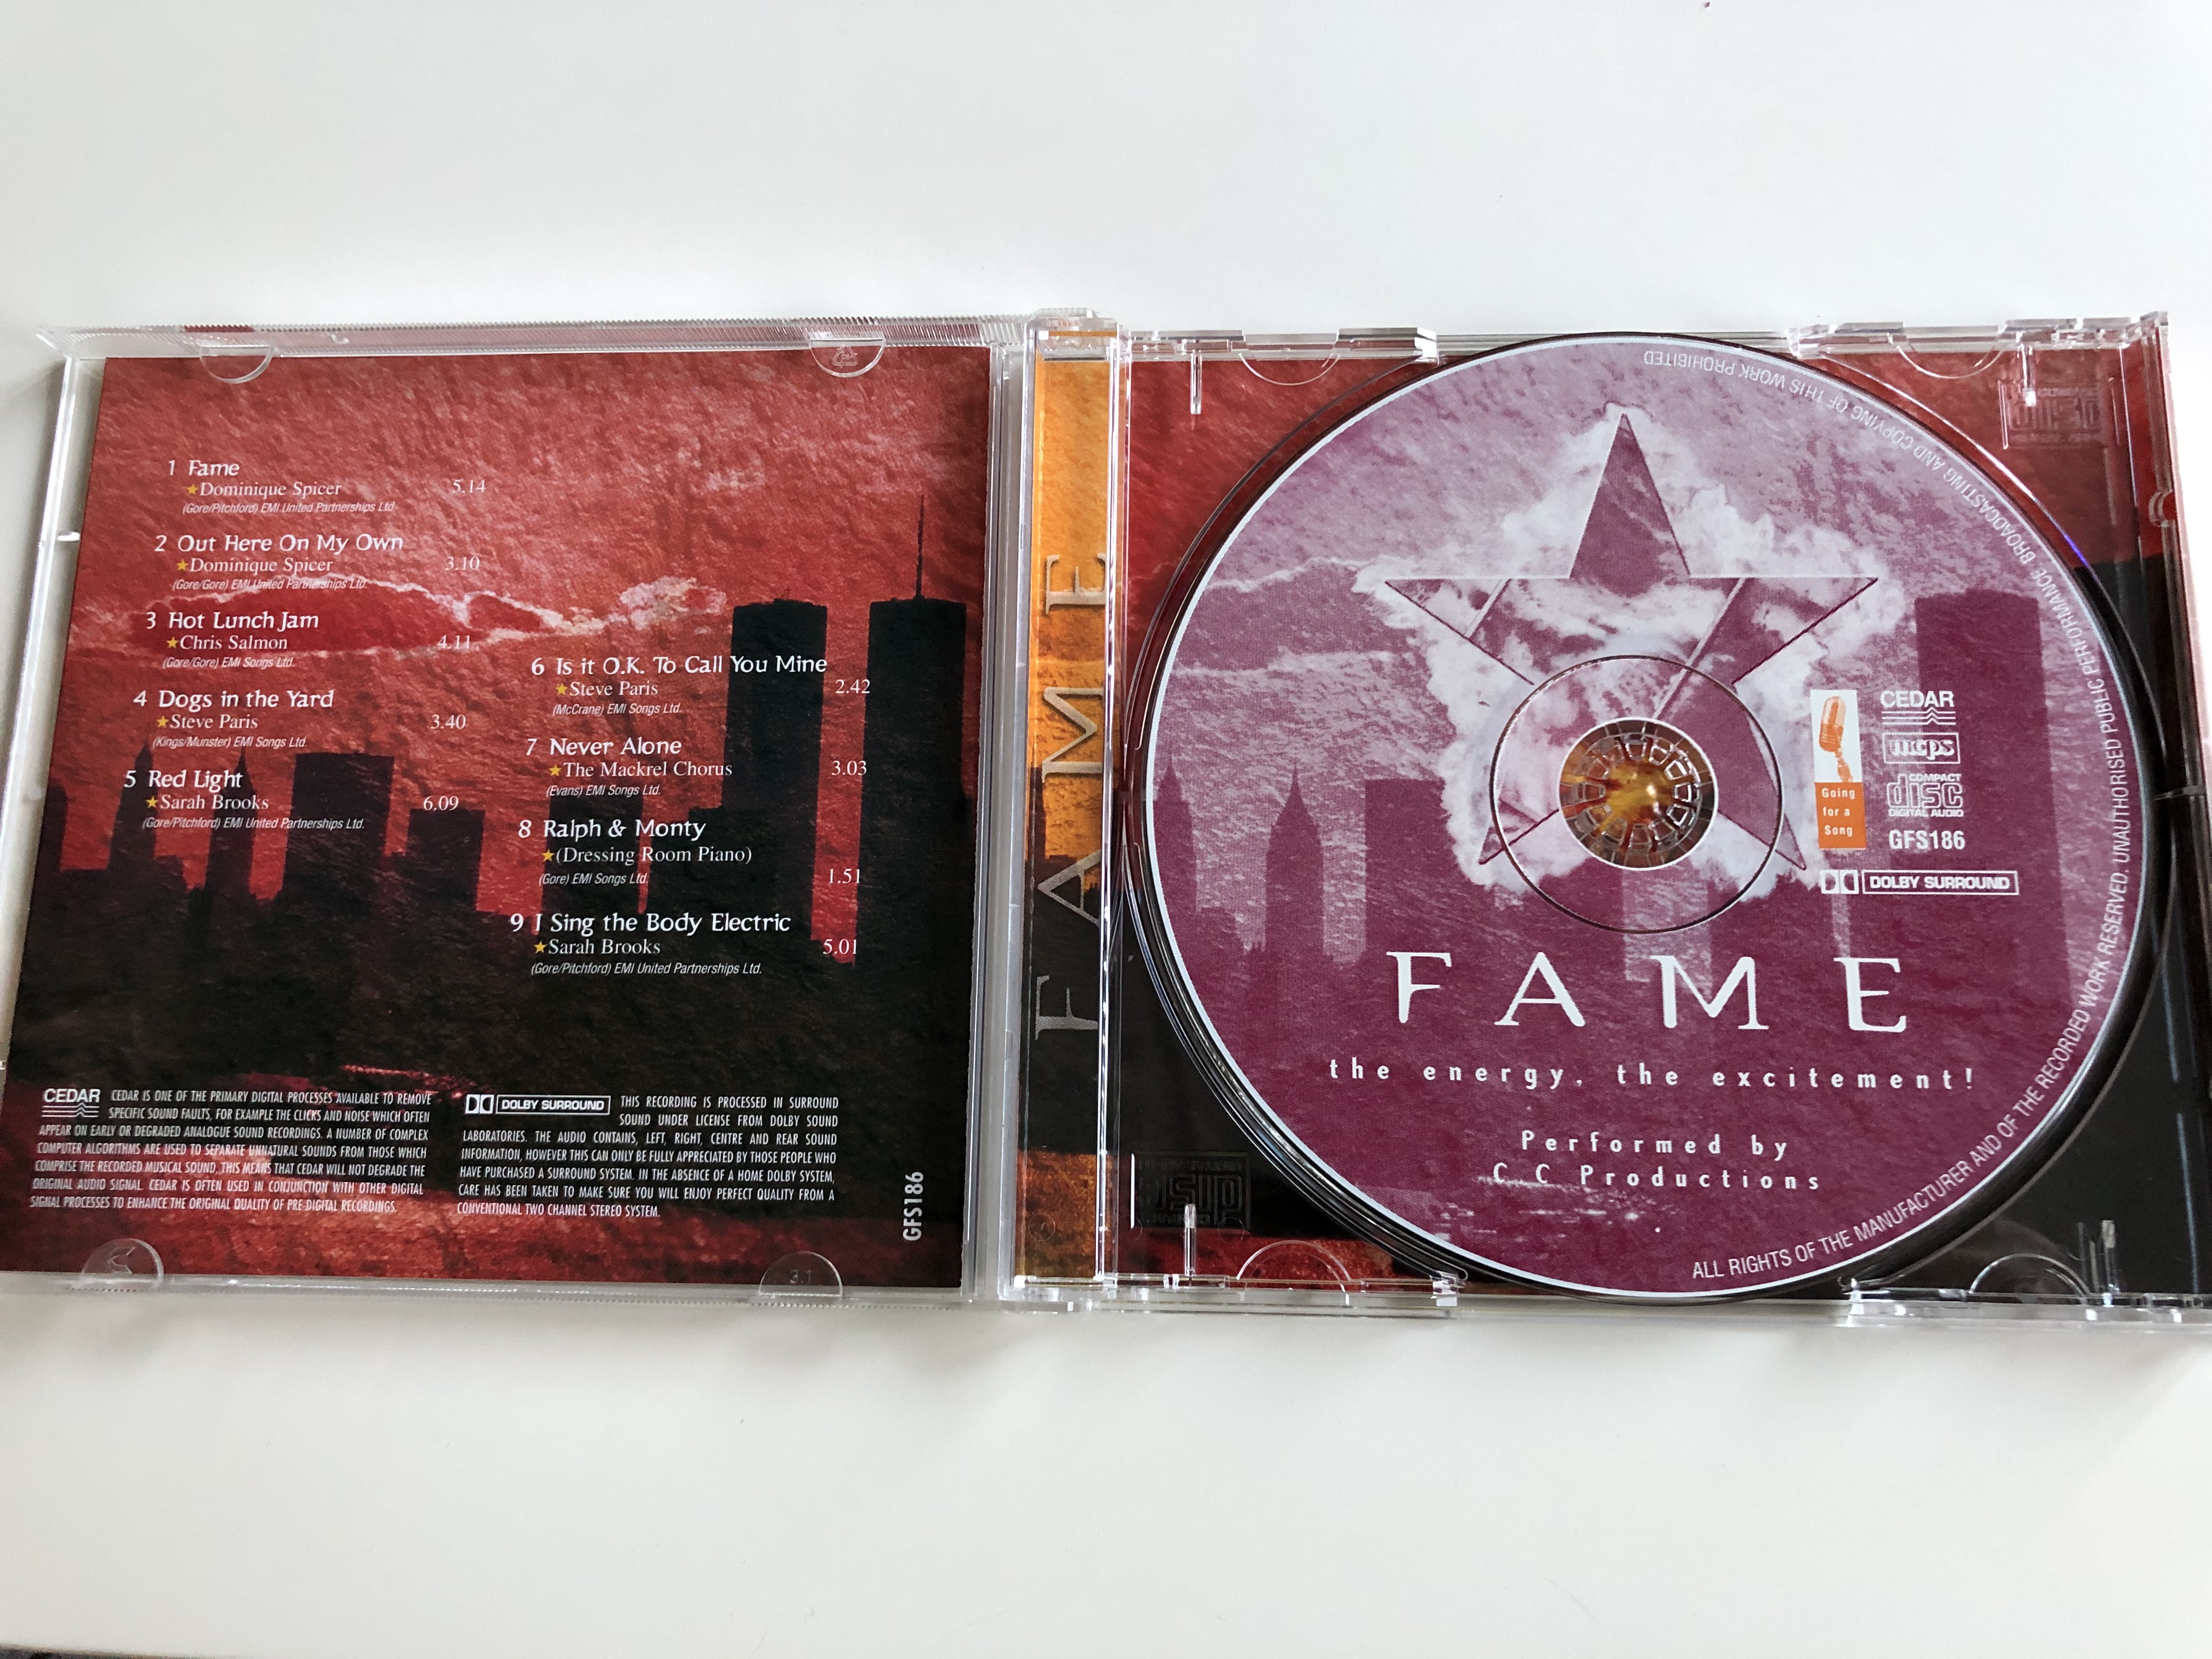 fame-performed-by-c.c-productions-includes-fame-out-there-on-my-own-red-light-is-it-okay-to-call-you-mine-the-energy-the-excitement-gfs186-4-.jpg